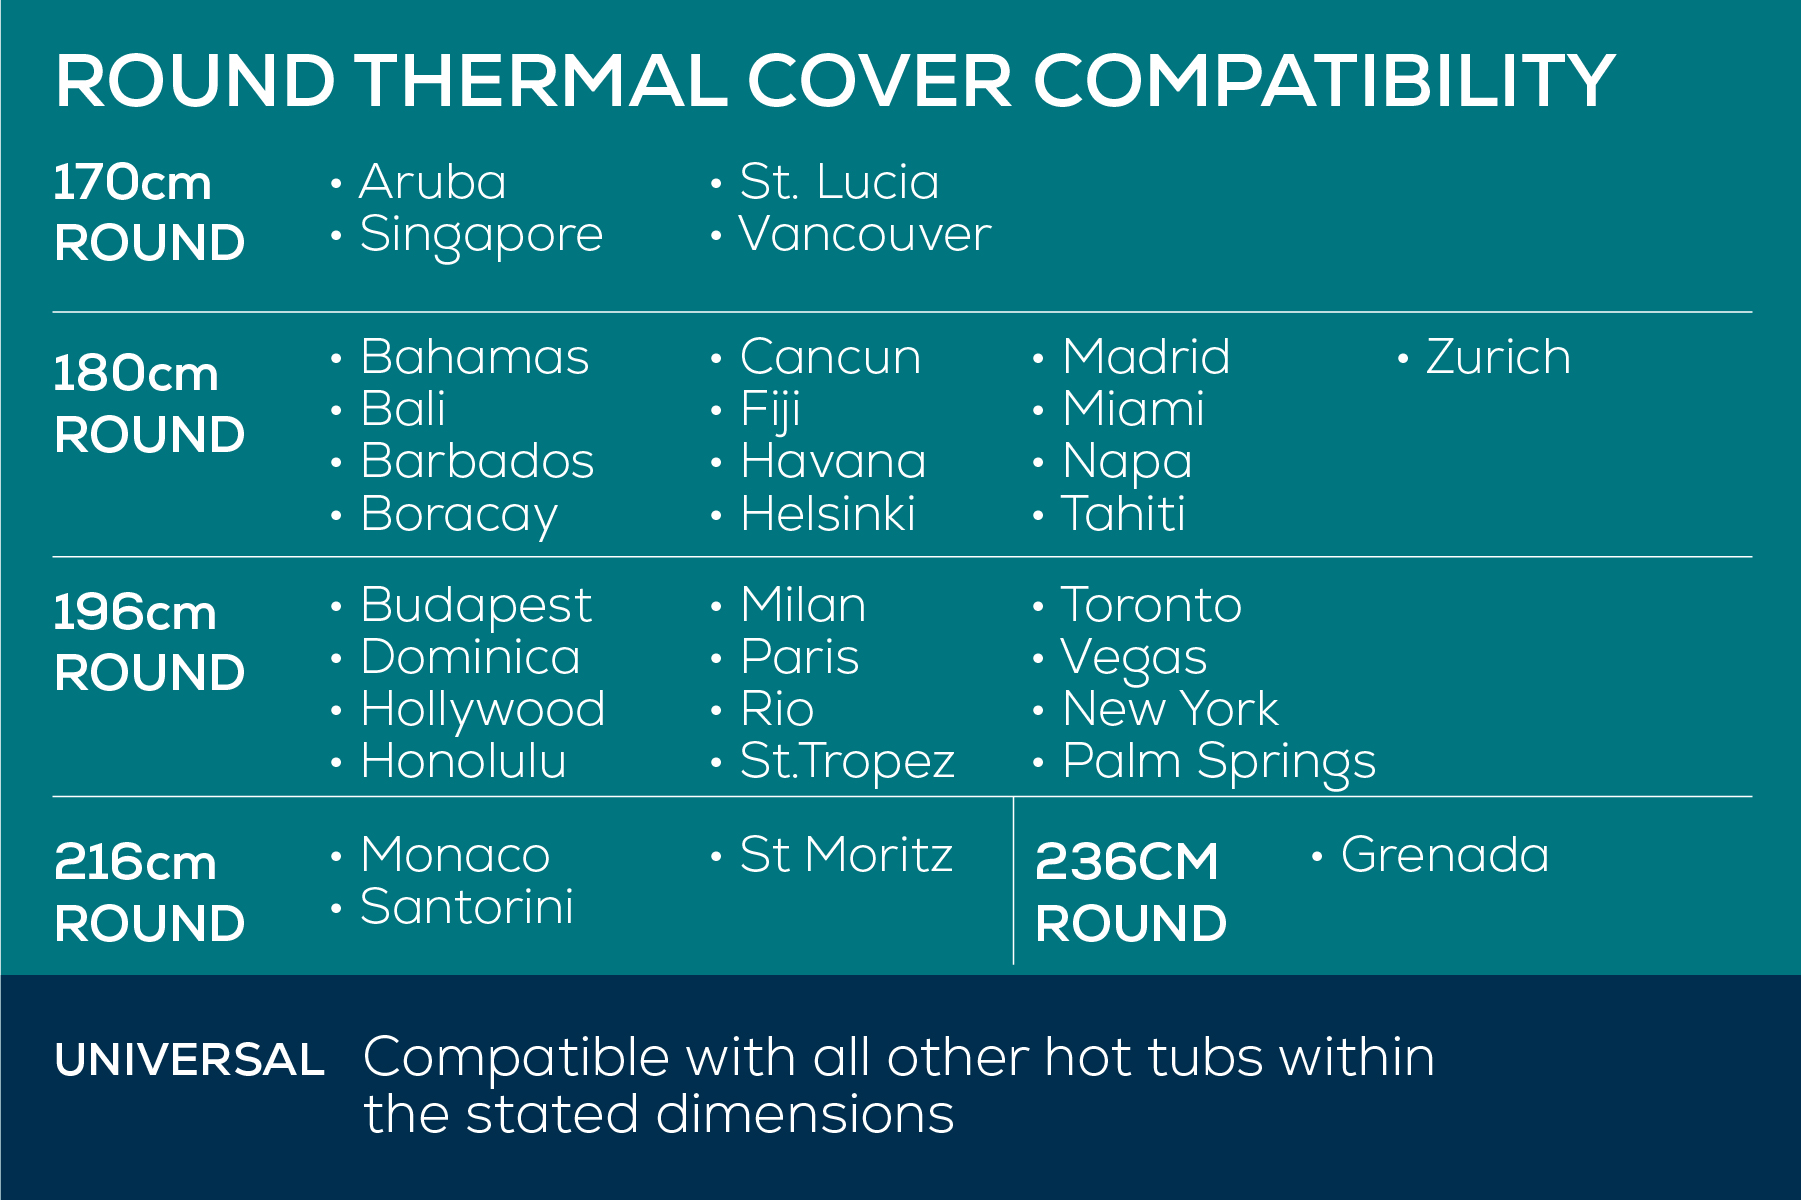 Round thermal hot tub covers